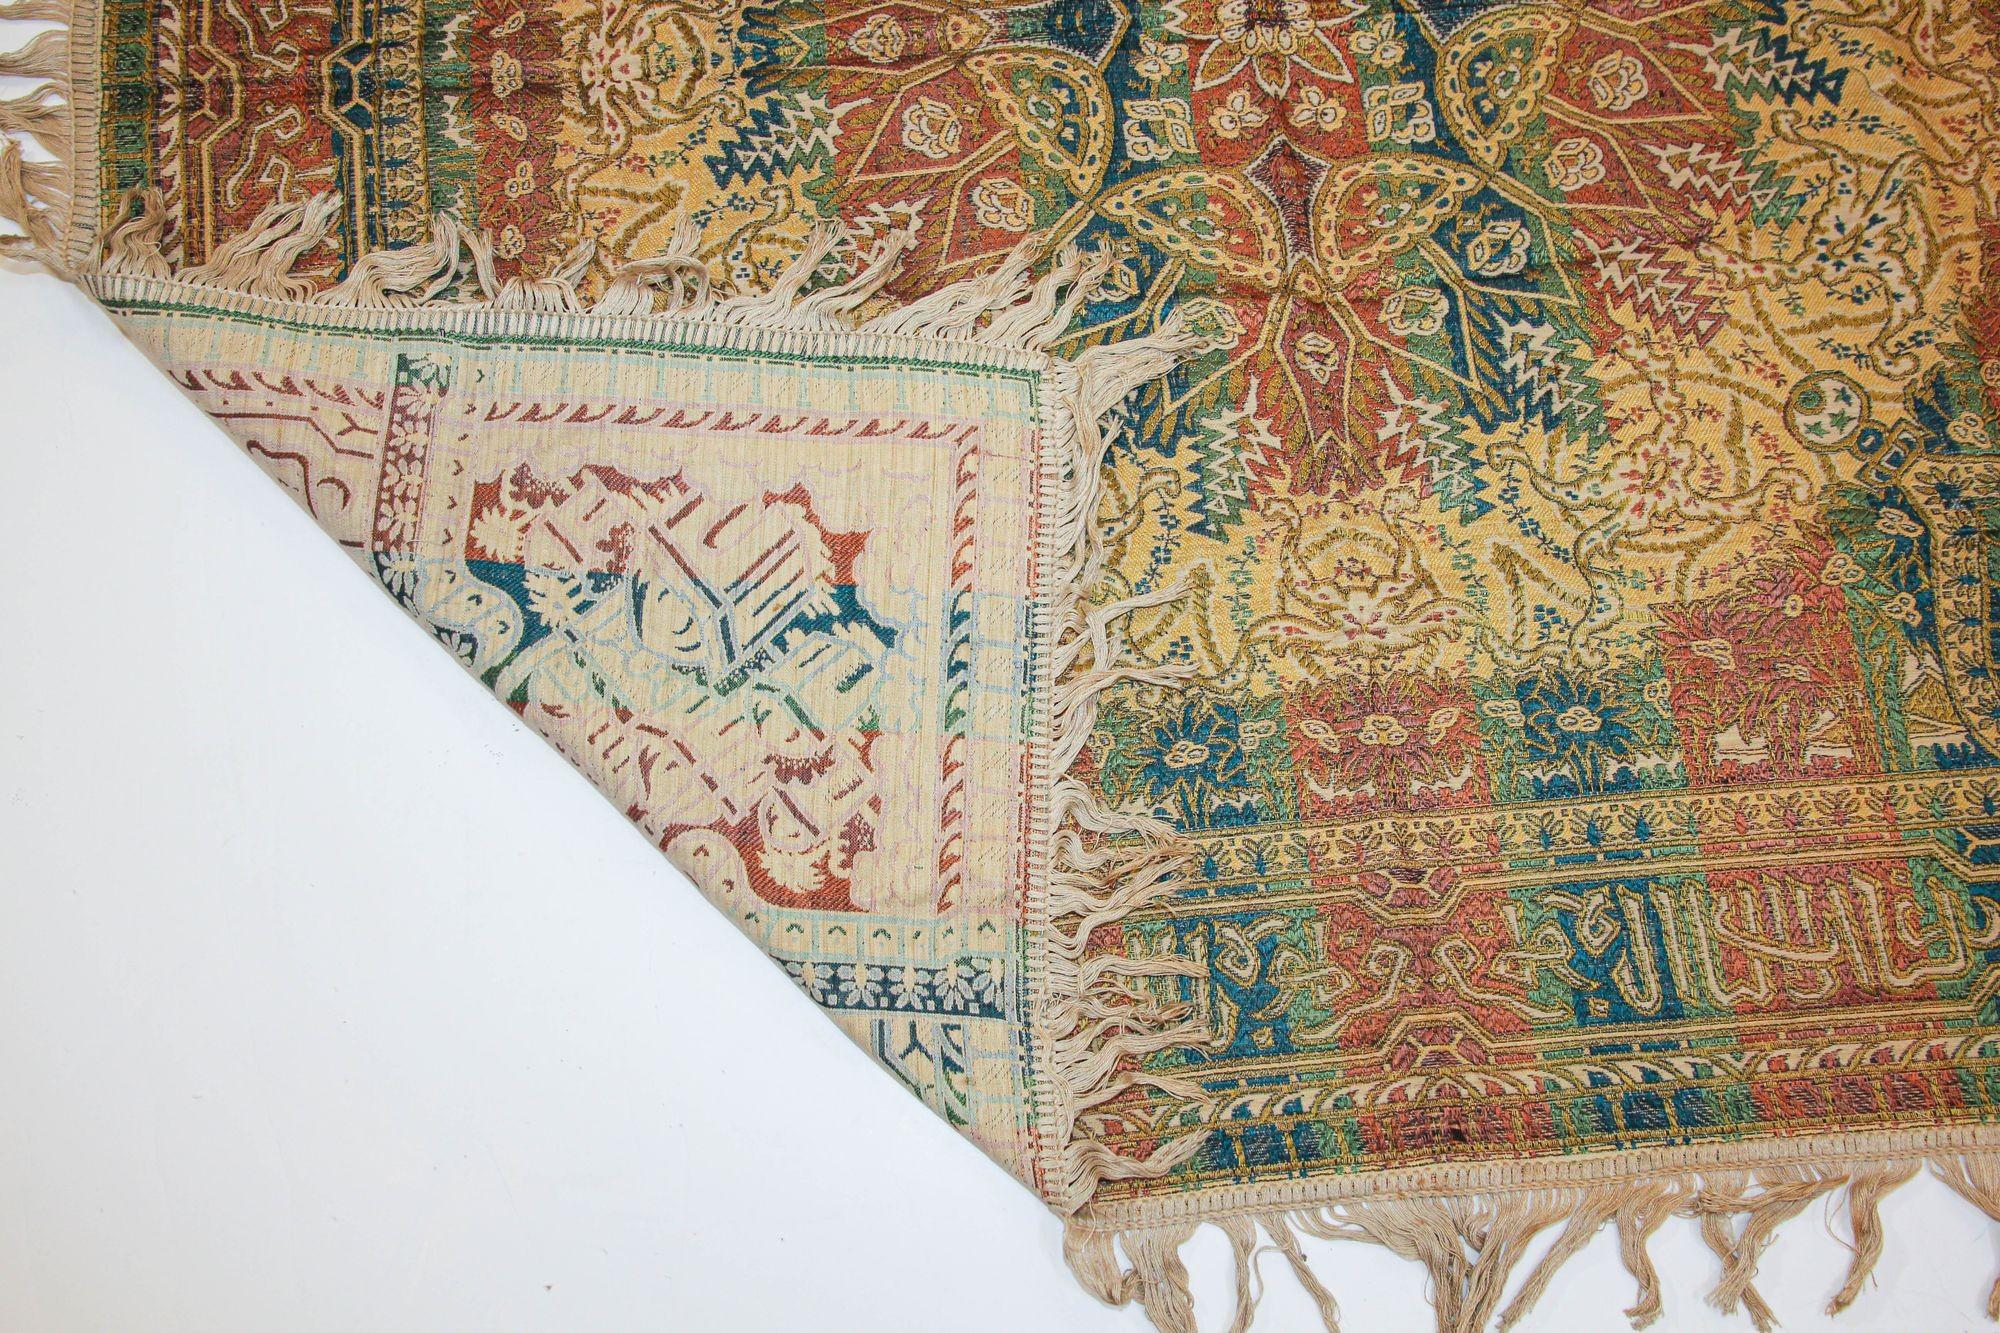 1940s Granada Islamic Spain Textile with Arabic Calligraphy Writing For Sale 10